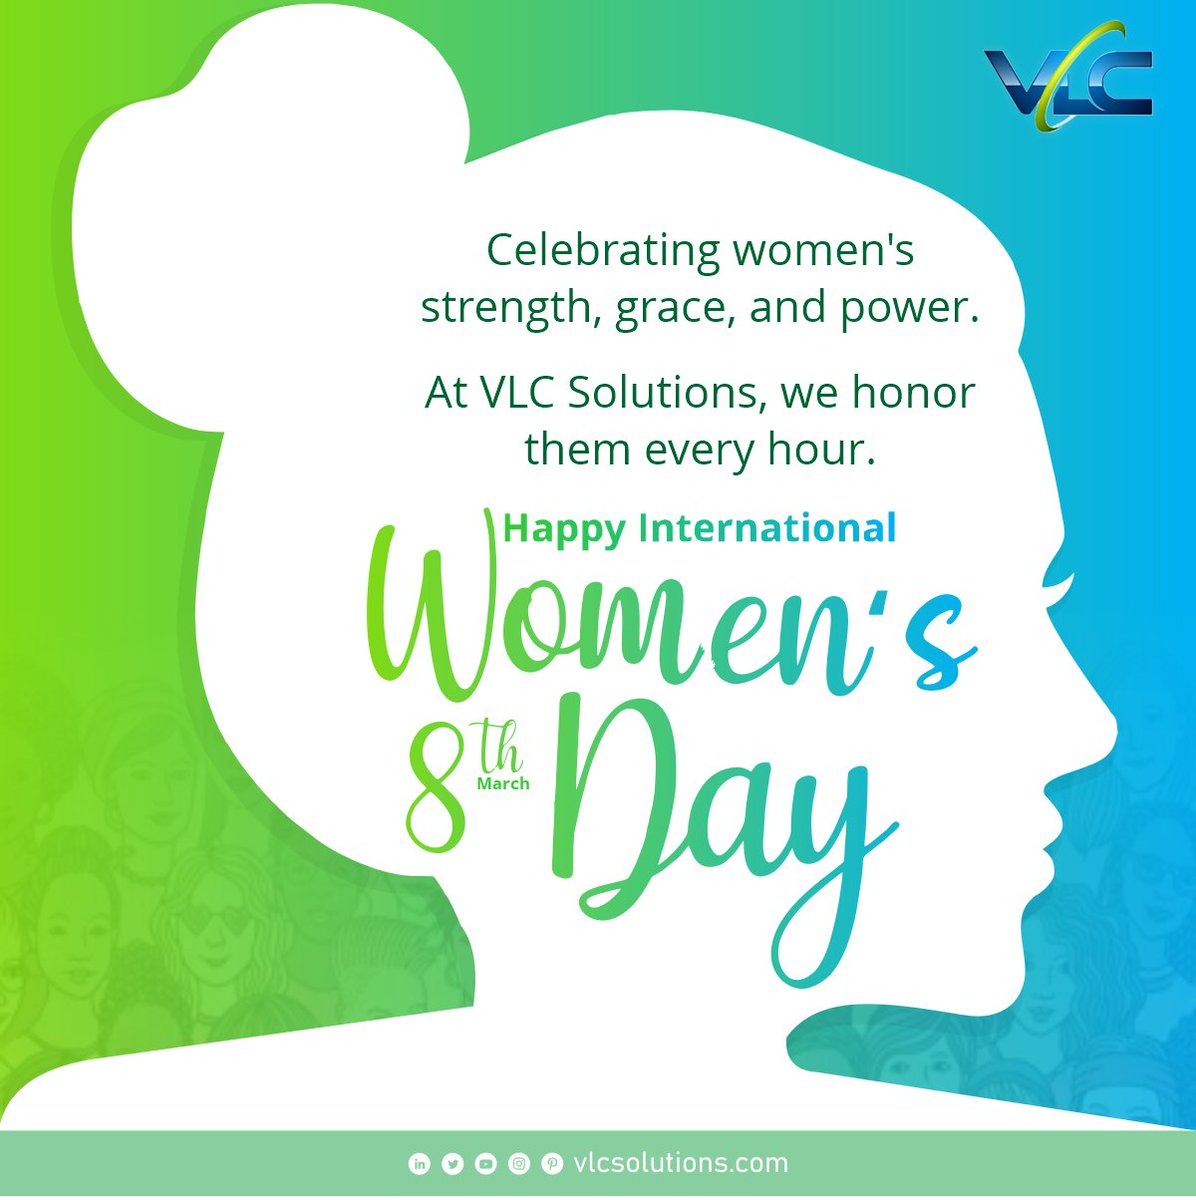 Supporting women's empowerment each day, not only on #WomensDay. Come together with us to honor their accomplishments, resilience, and fortitude. vlcsolutions.com #Empowerment